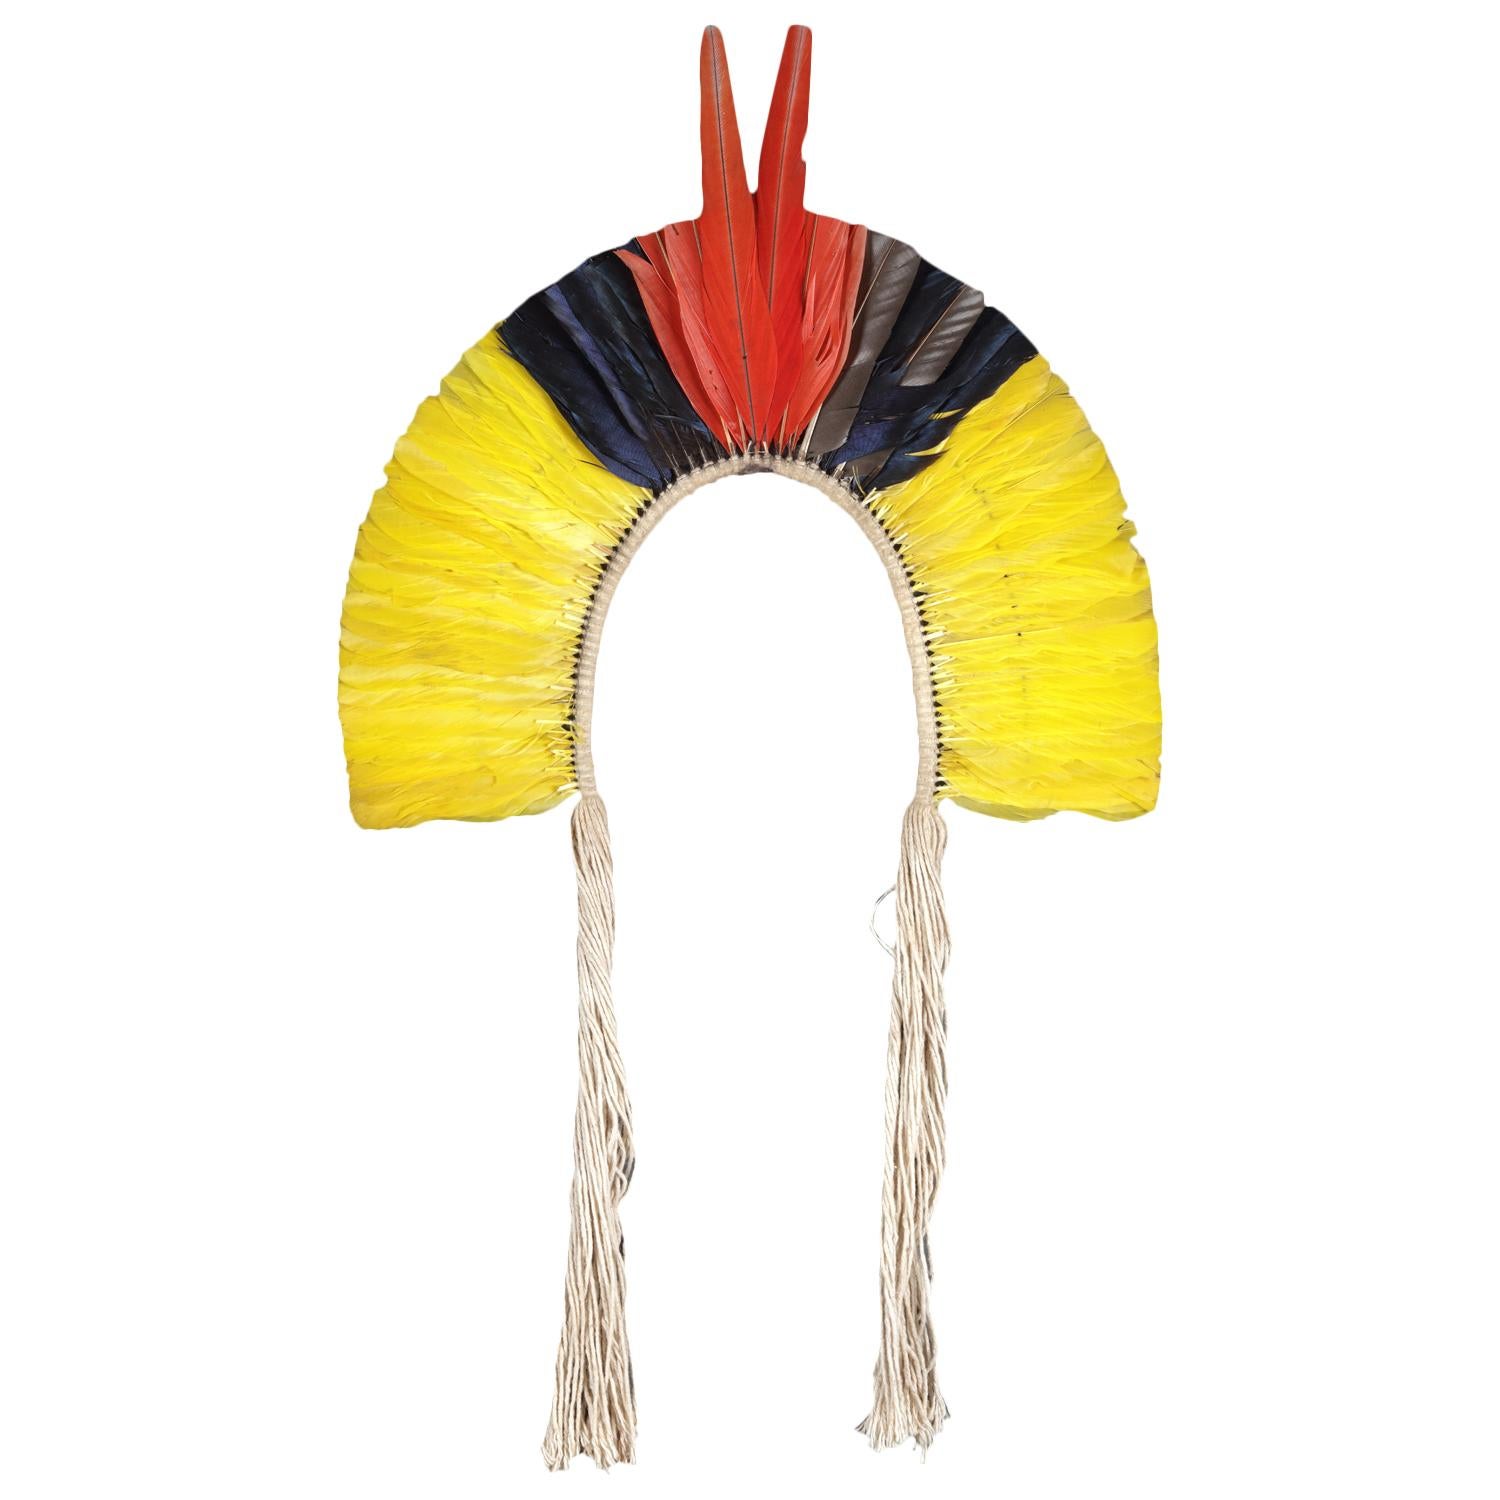 ADJUSTABLE Yellow with beads Mini Feather Headdress Native Indian Style 